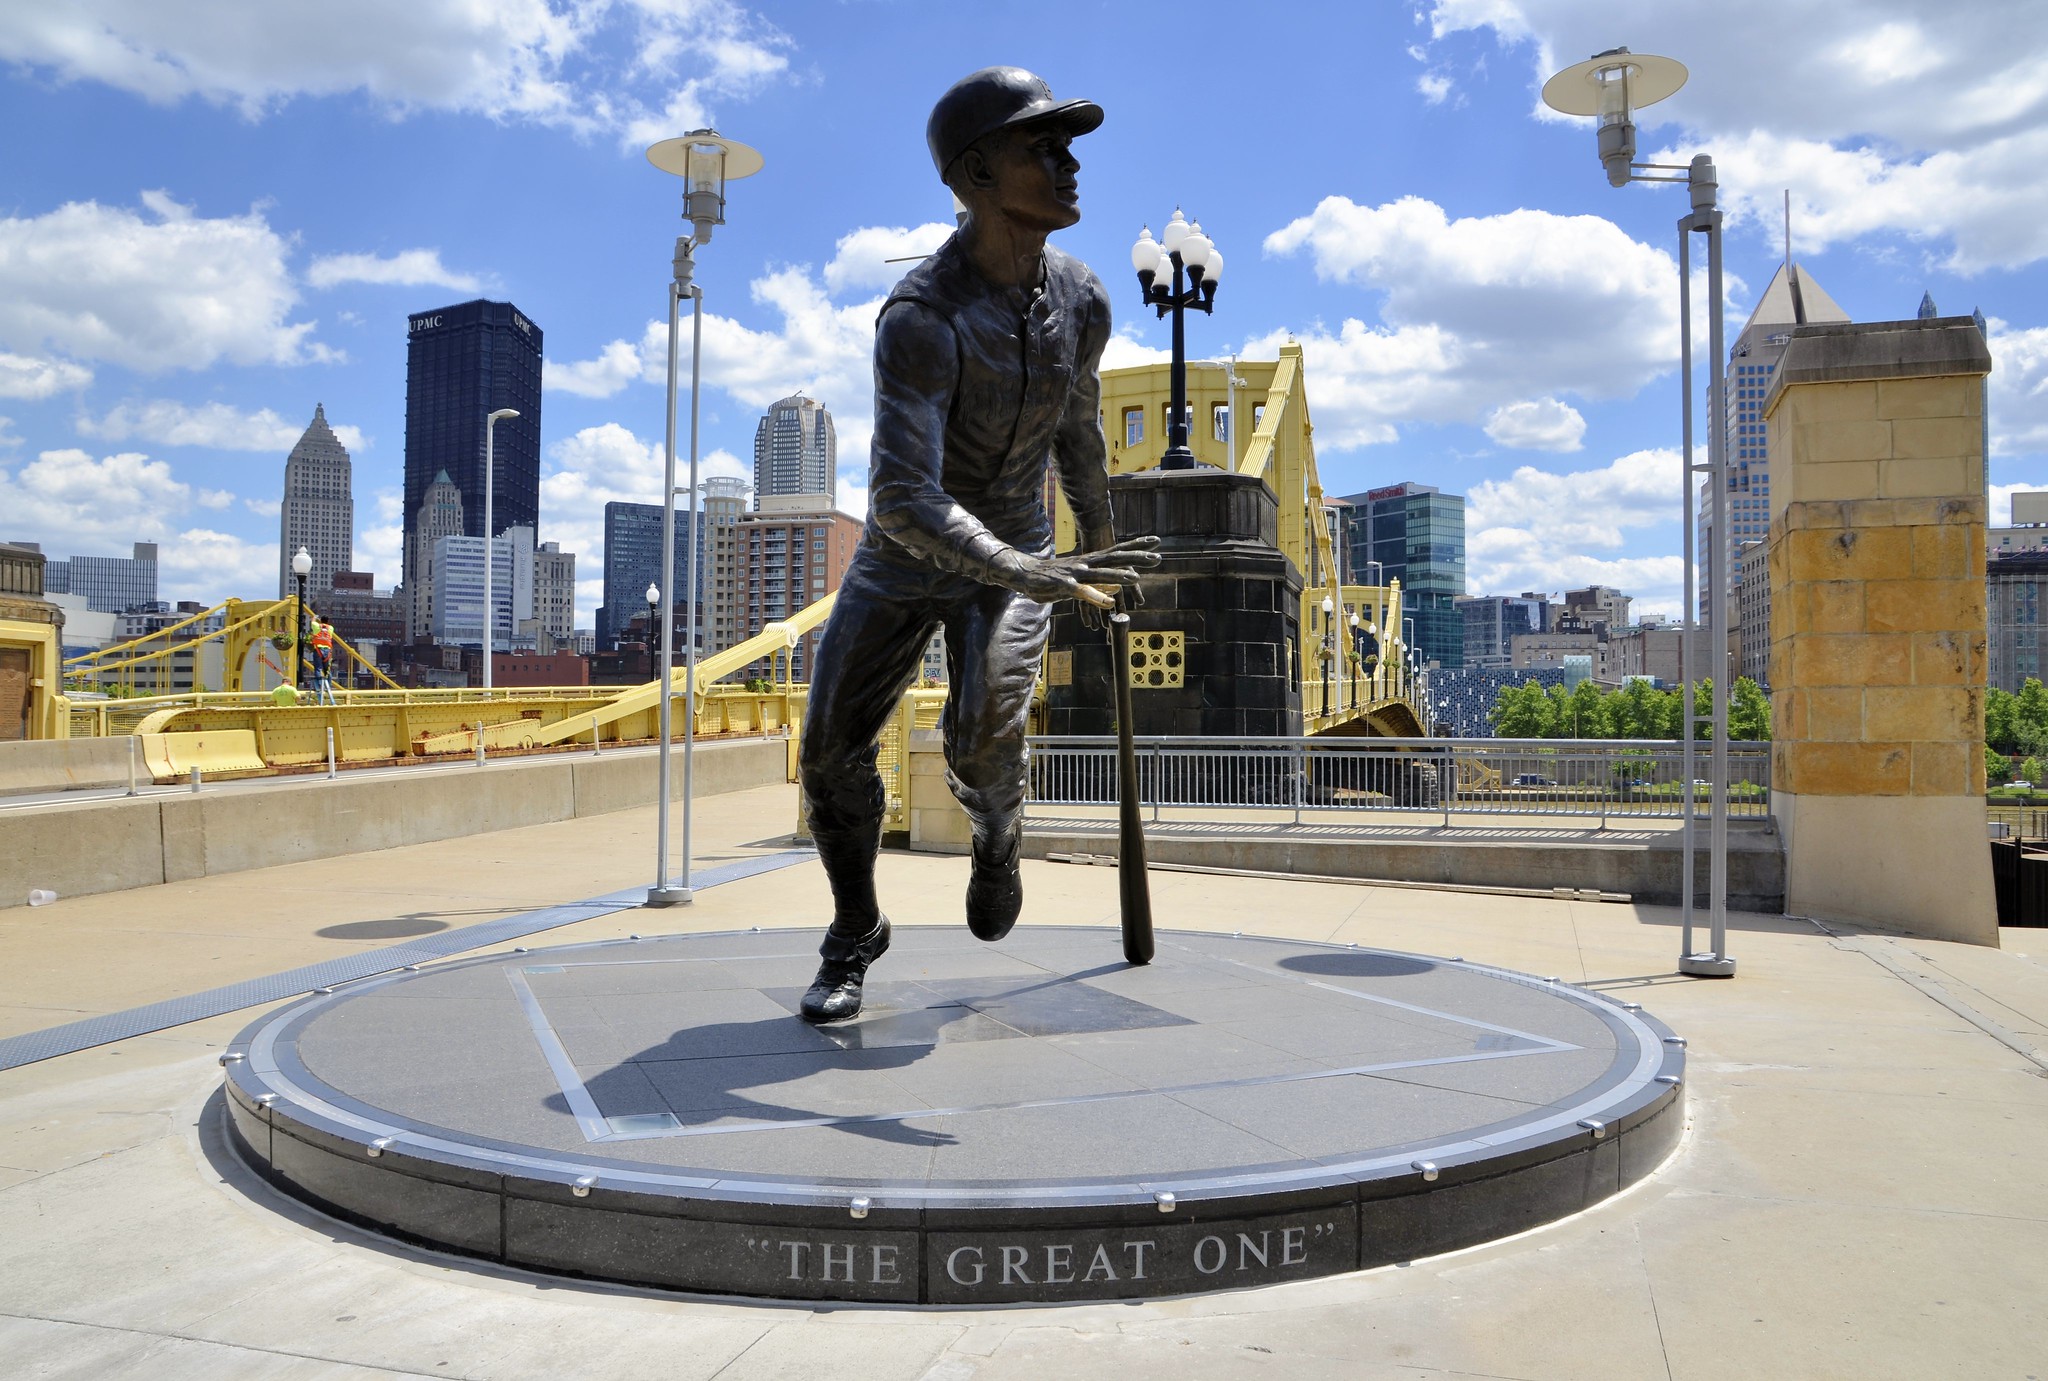 10 Fascinating Facts About Roberto Clemente - Discover Walks Blog